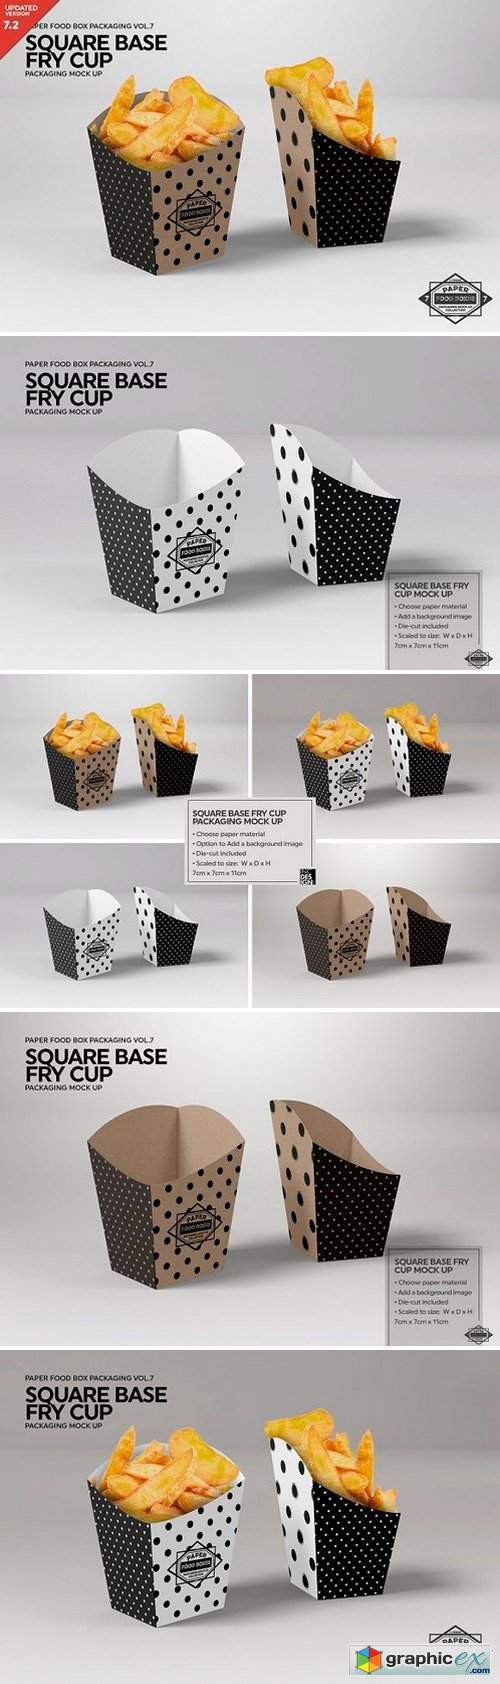 Square Base Fry Cup Packaging Mockup